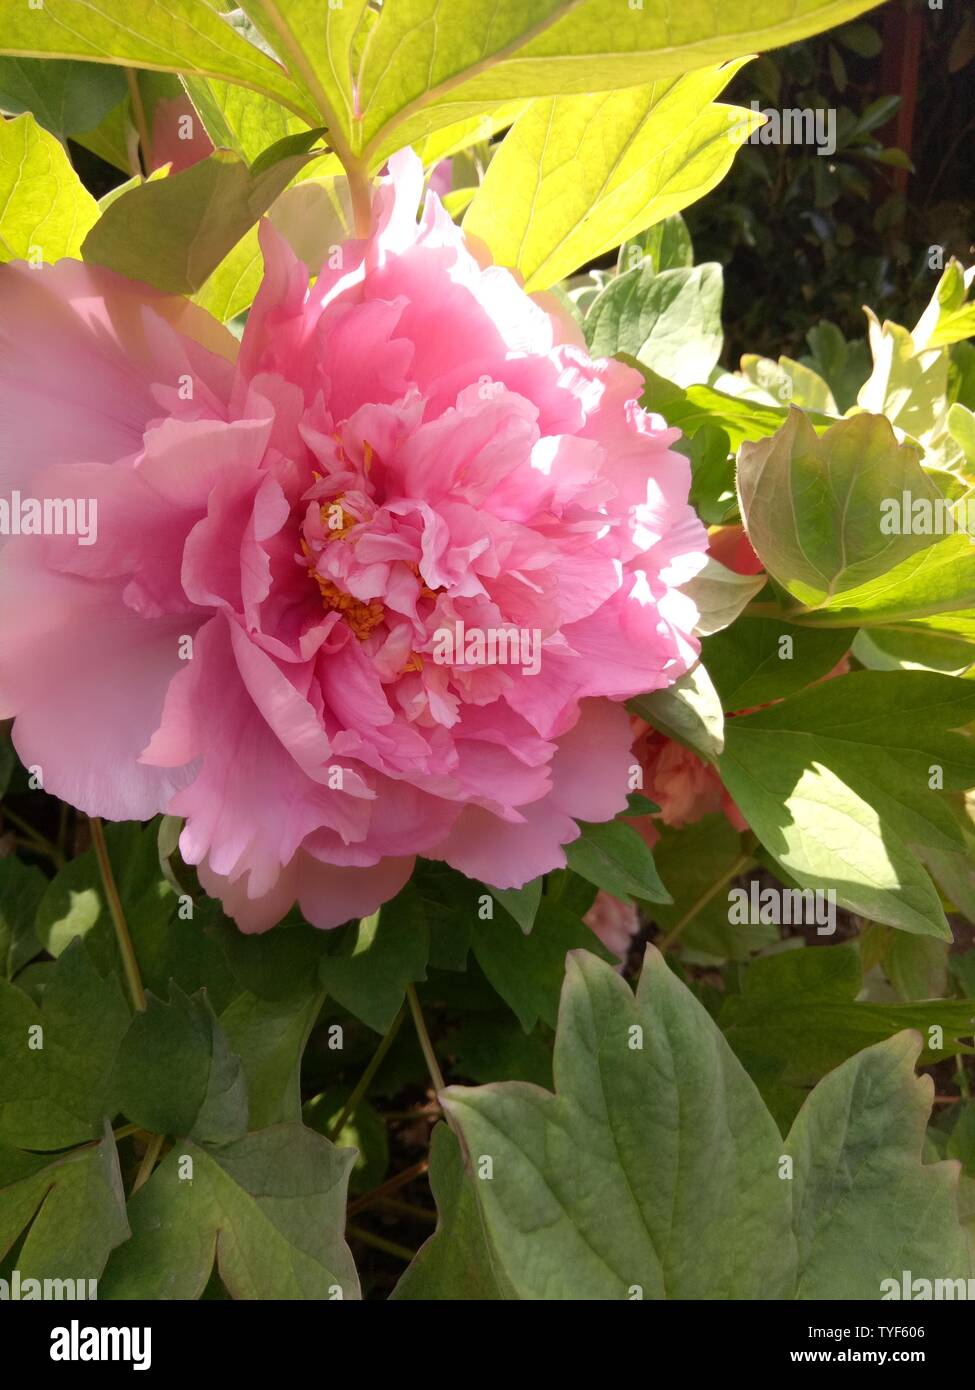 Peony Luoyang peony peony flowers bloom national color and fragrance Stock Photo